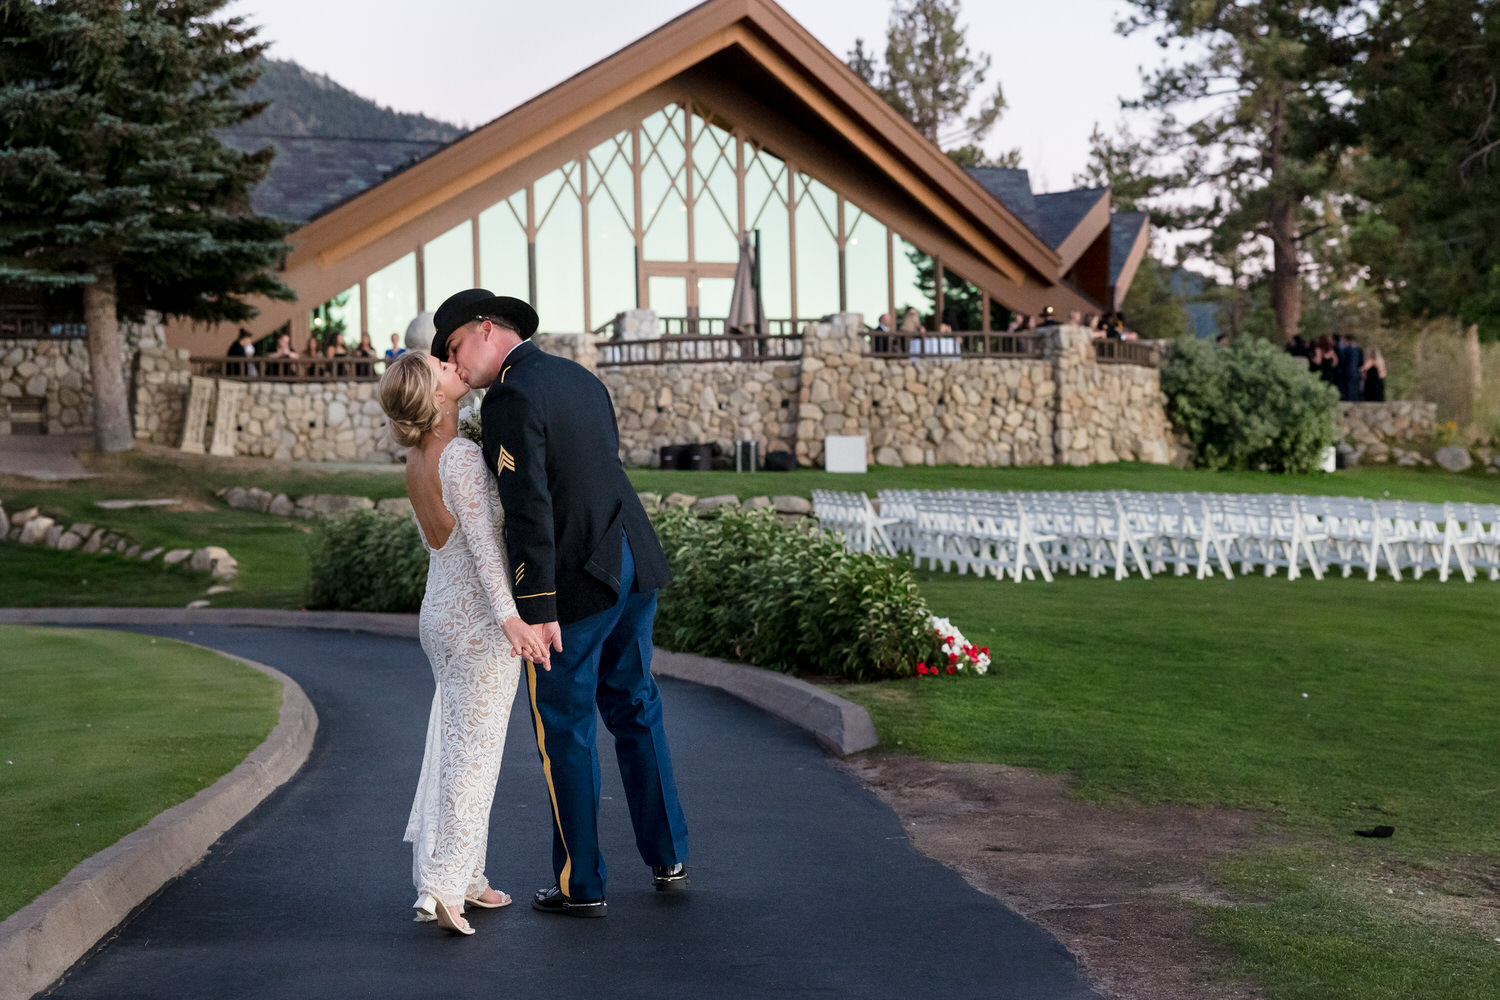 A bride and groom enjoy a romantic sunset kiss in front of the North Lawn at Edgewood Tahoe Resort.